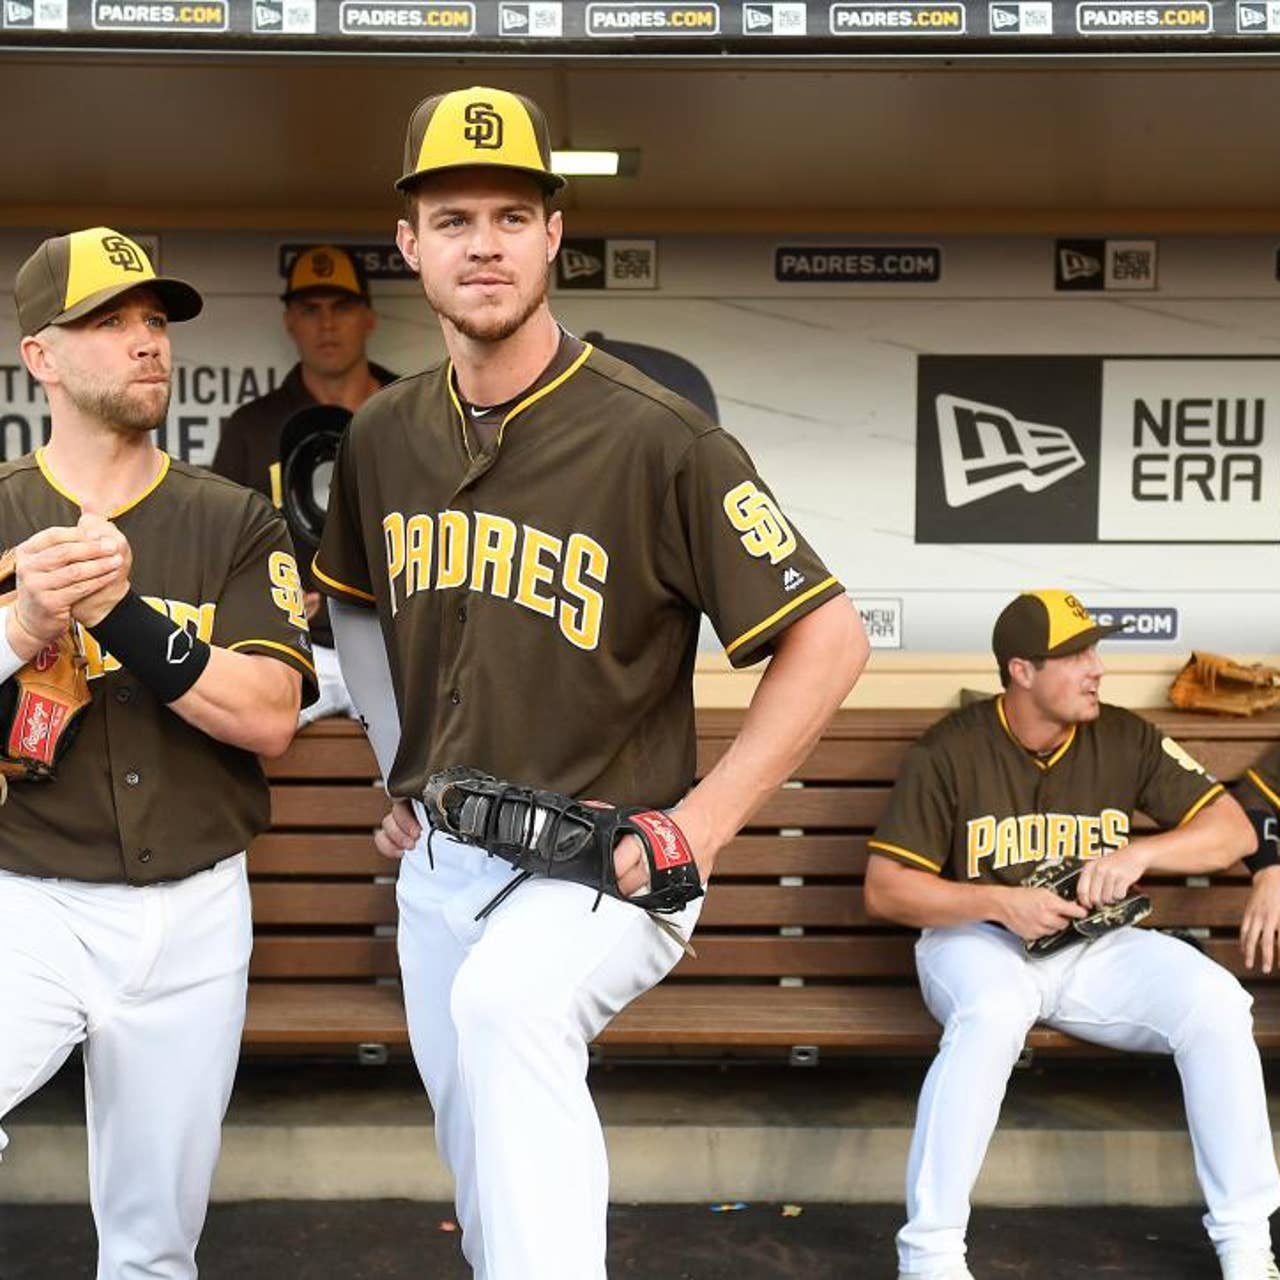 New color scheme for Padres: Club switching to brown & gold look for 2020  and beyond